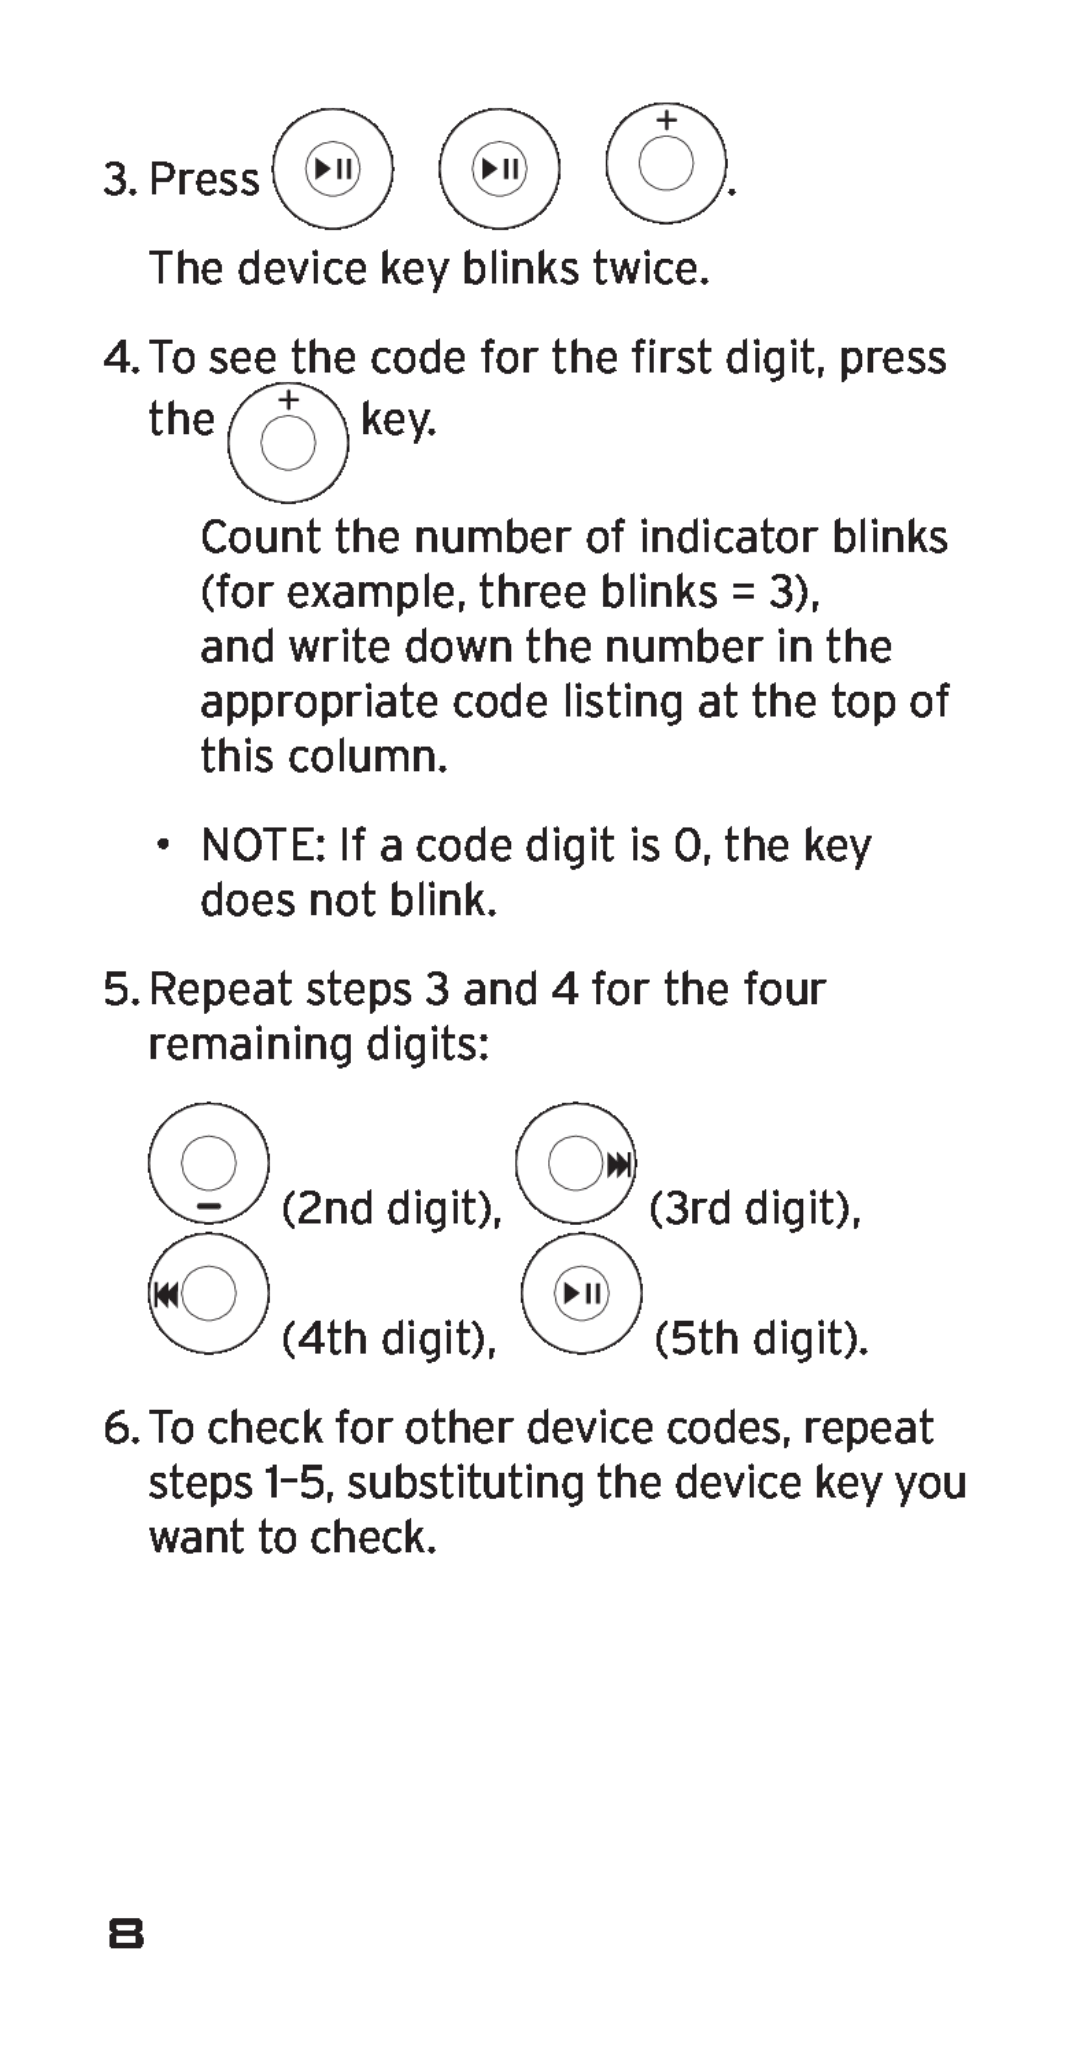 Acoustic Research ARRI03G, ARi3G manual To see the code for the first digit, press the key 